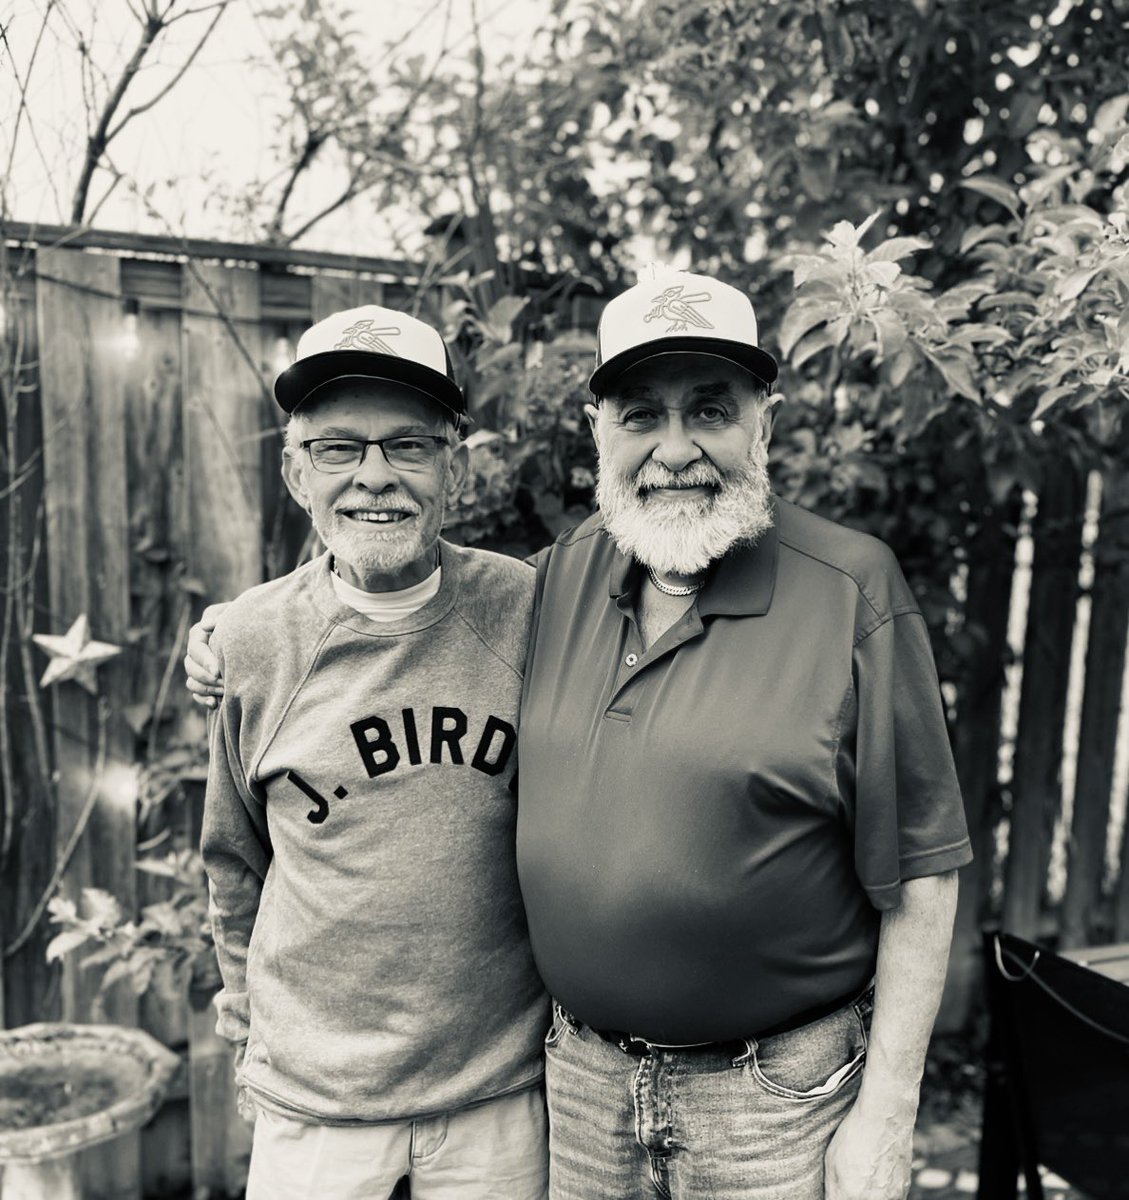 Meet our founder’s father and father-in-law. Their love for the game inspired our love for the game of baseball. ❤️⚾️ This Father's Day, join us in celebrating the proud sporting legacy passed down from generation to generation. #FathersDay #BaseballCanada #Baseball